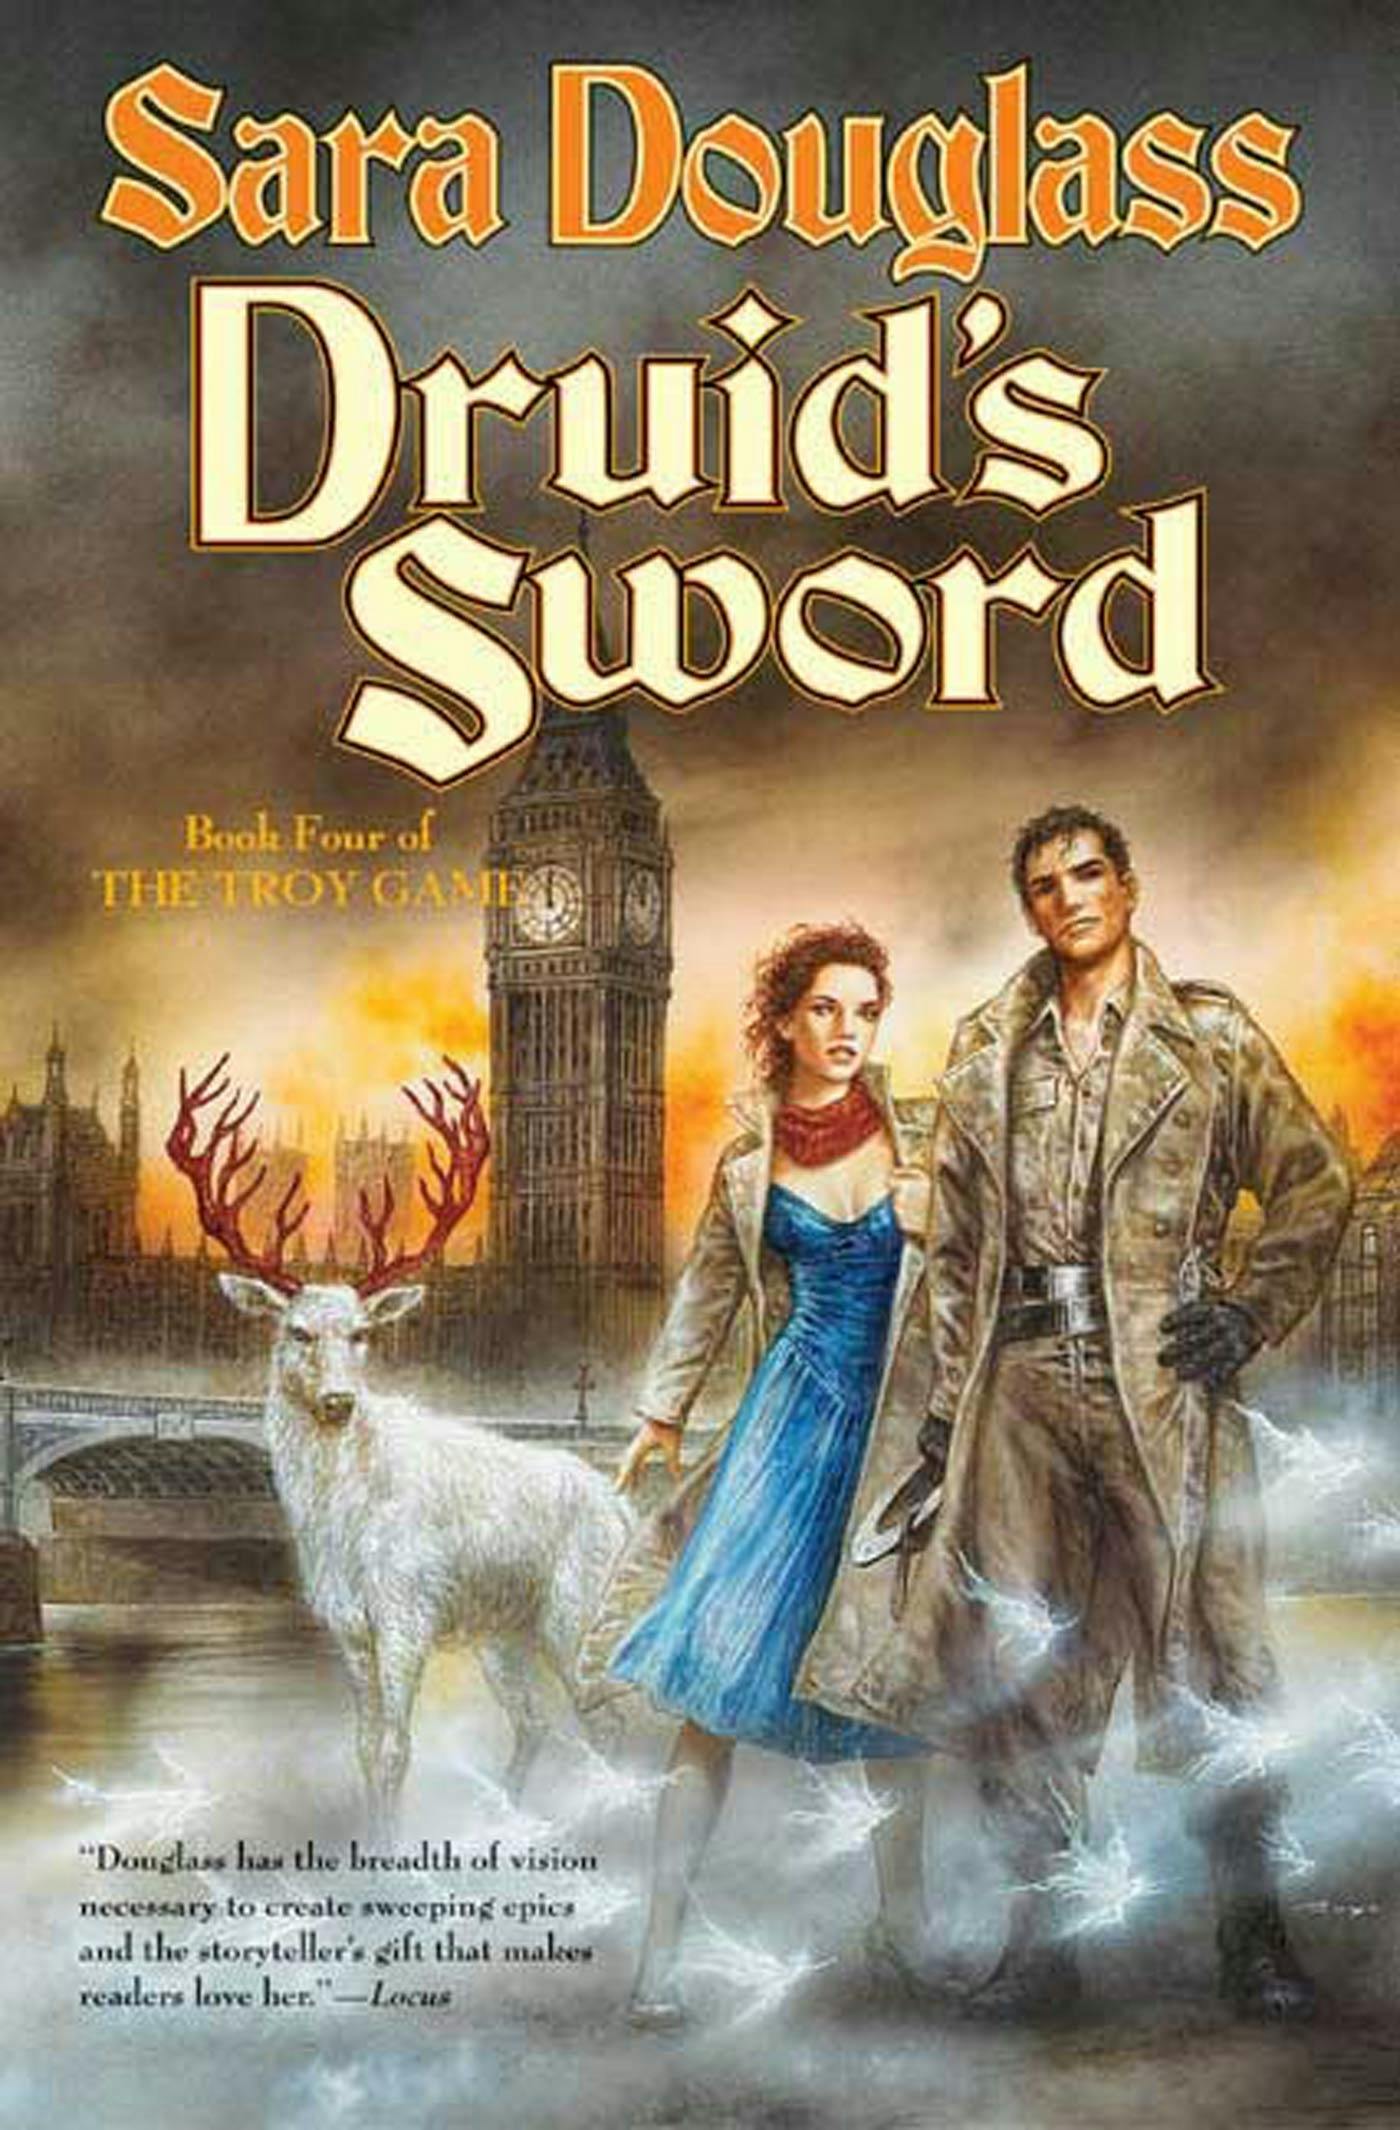 Cover for the book titled as: Druid's Sword